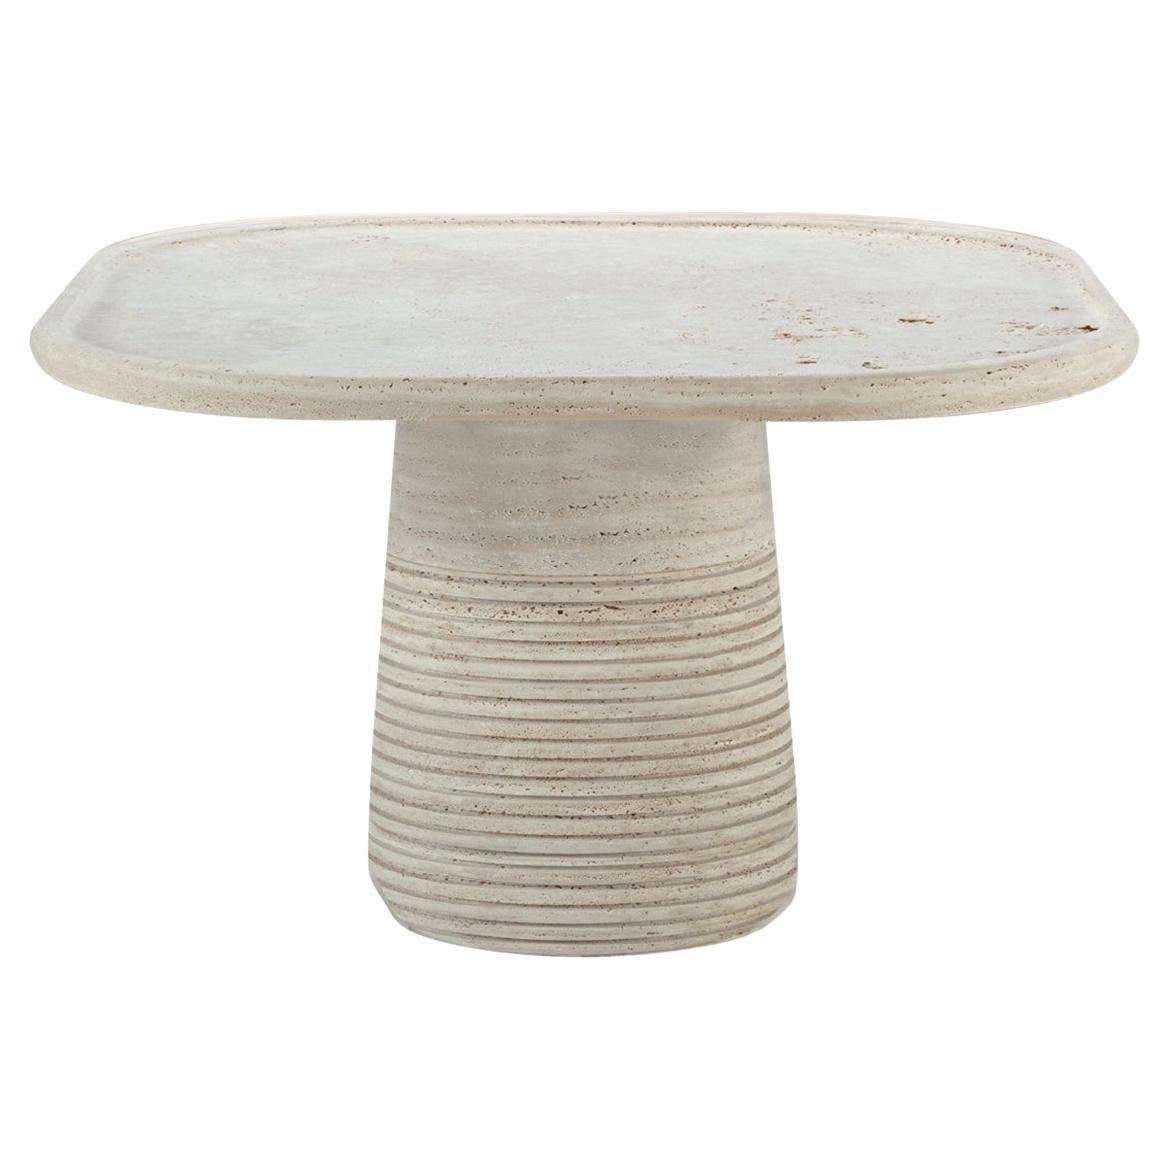 Portuguese Dining Table Poppy in Beige Natural Travertino Stone by Mambo